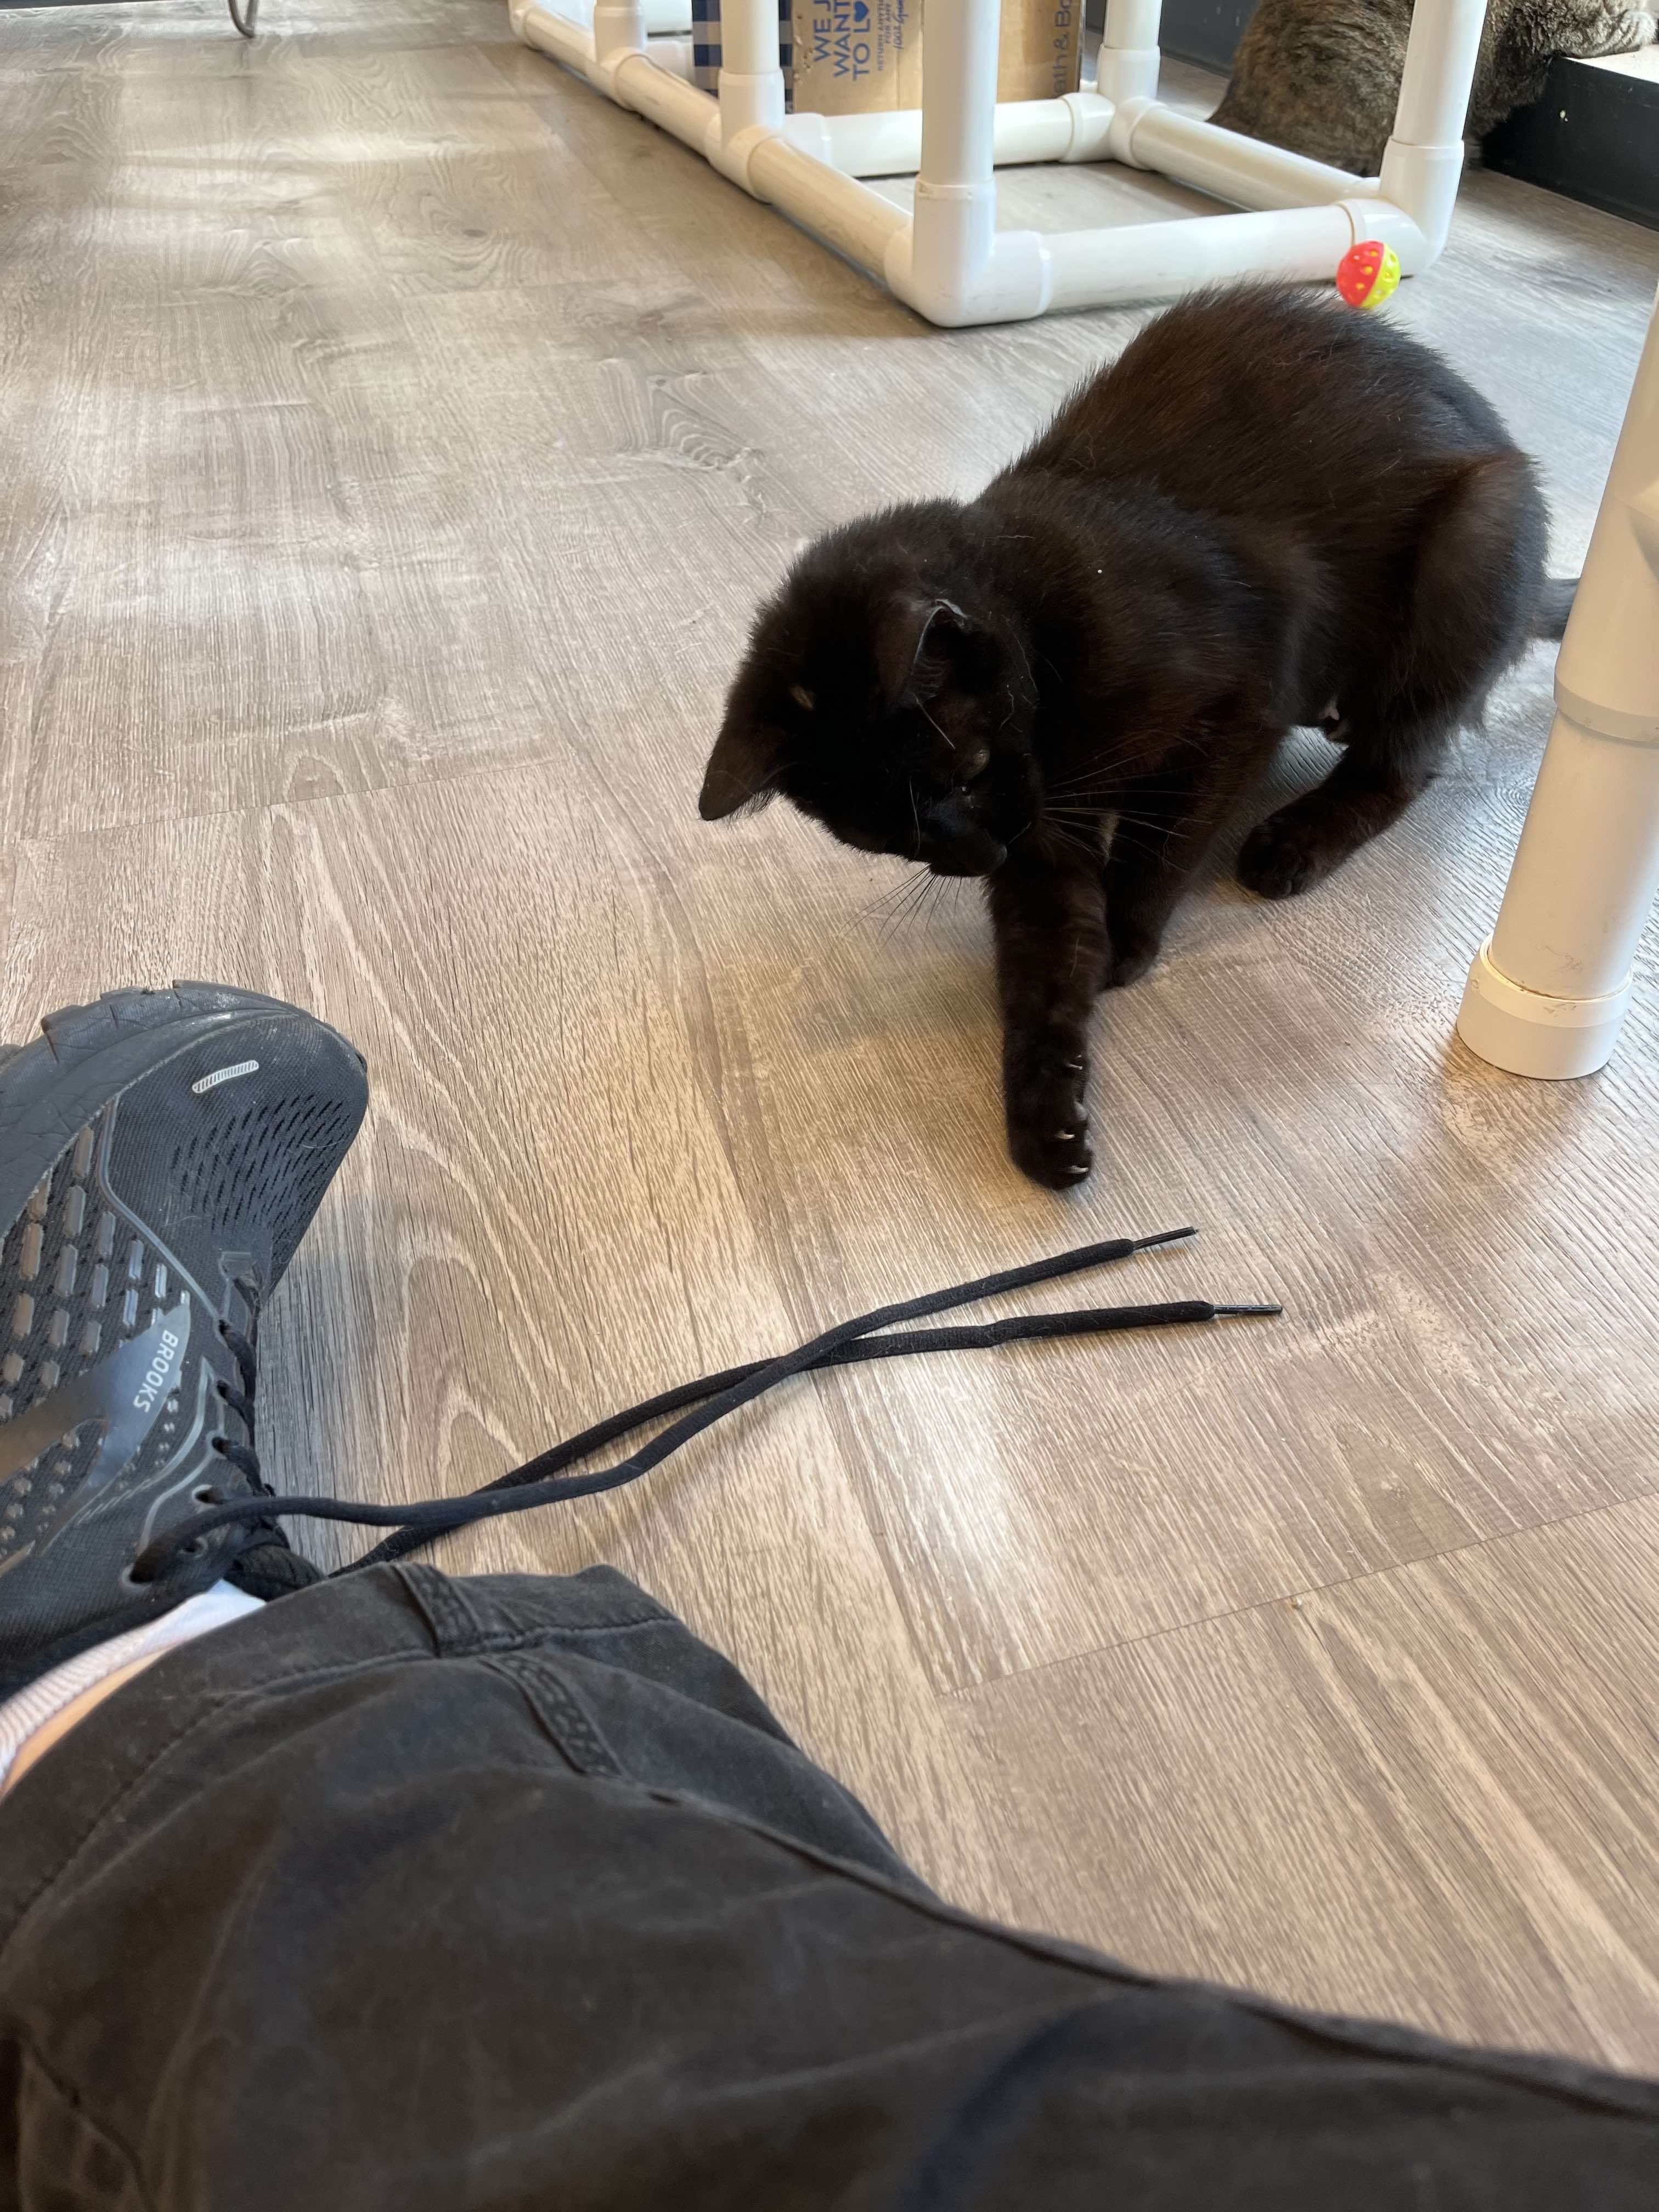 Black kitten playing with shoelace